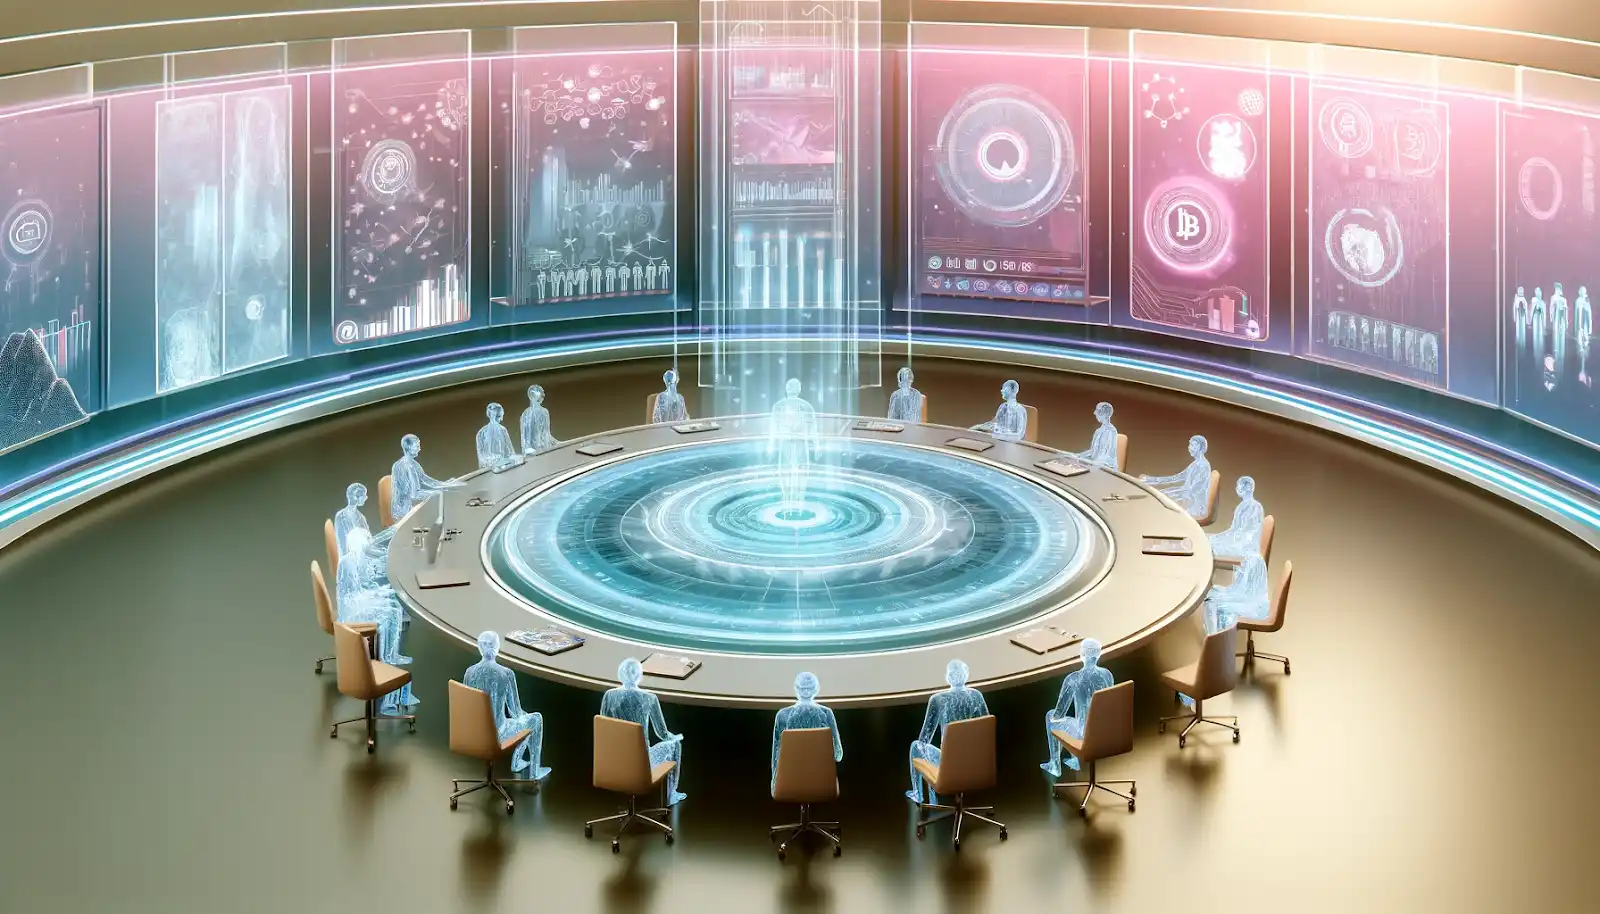 Diverse holographic figures around a circular table, representing the decentralized nature of DAOs.